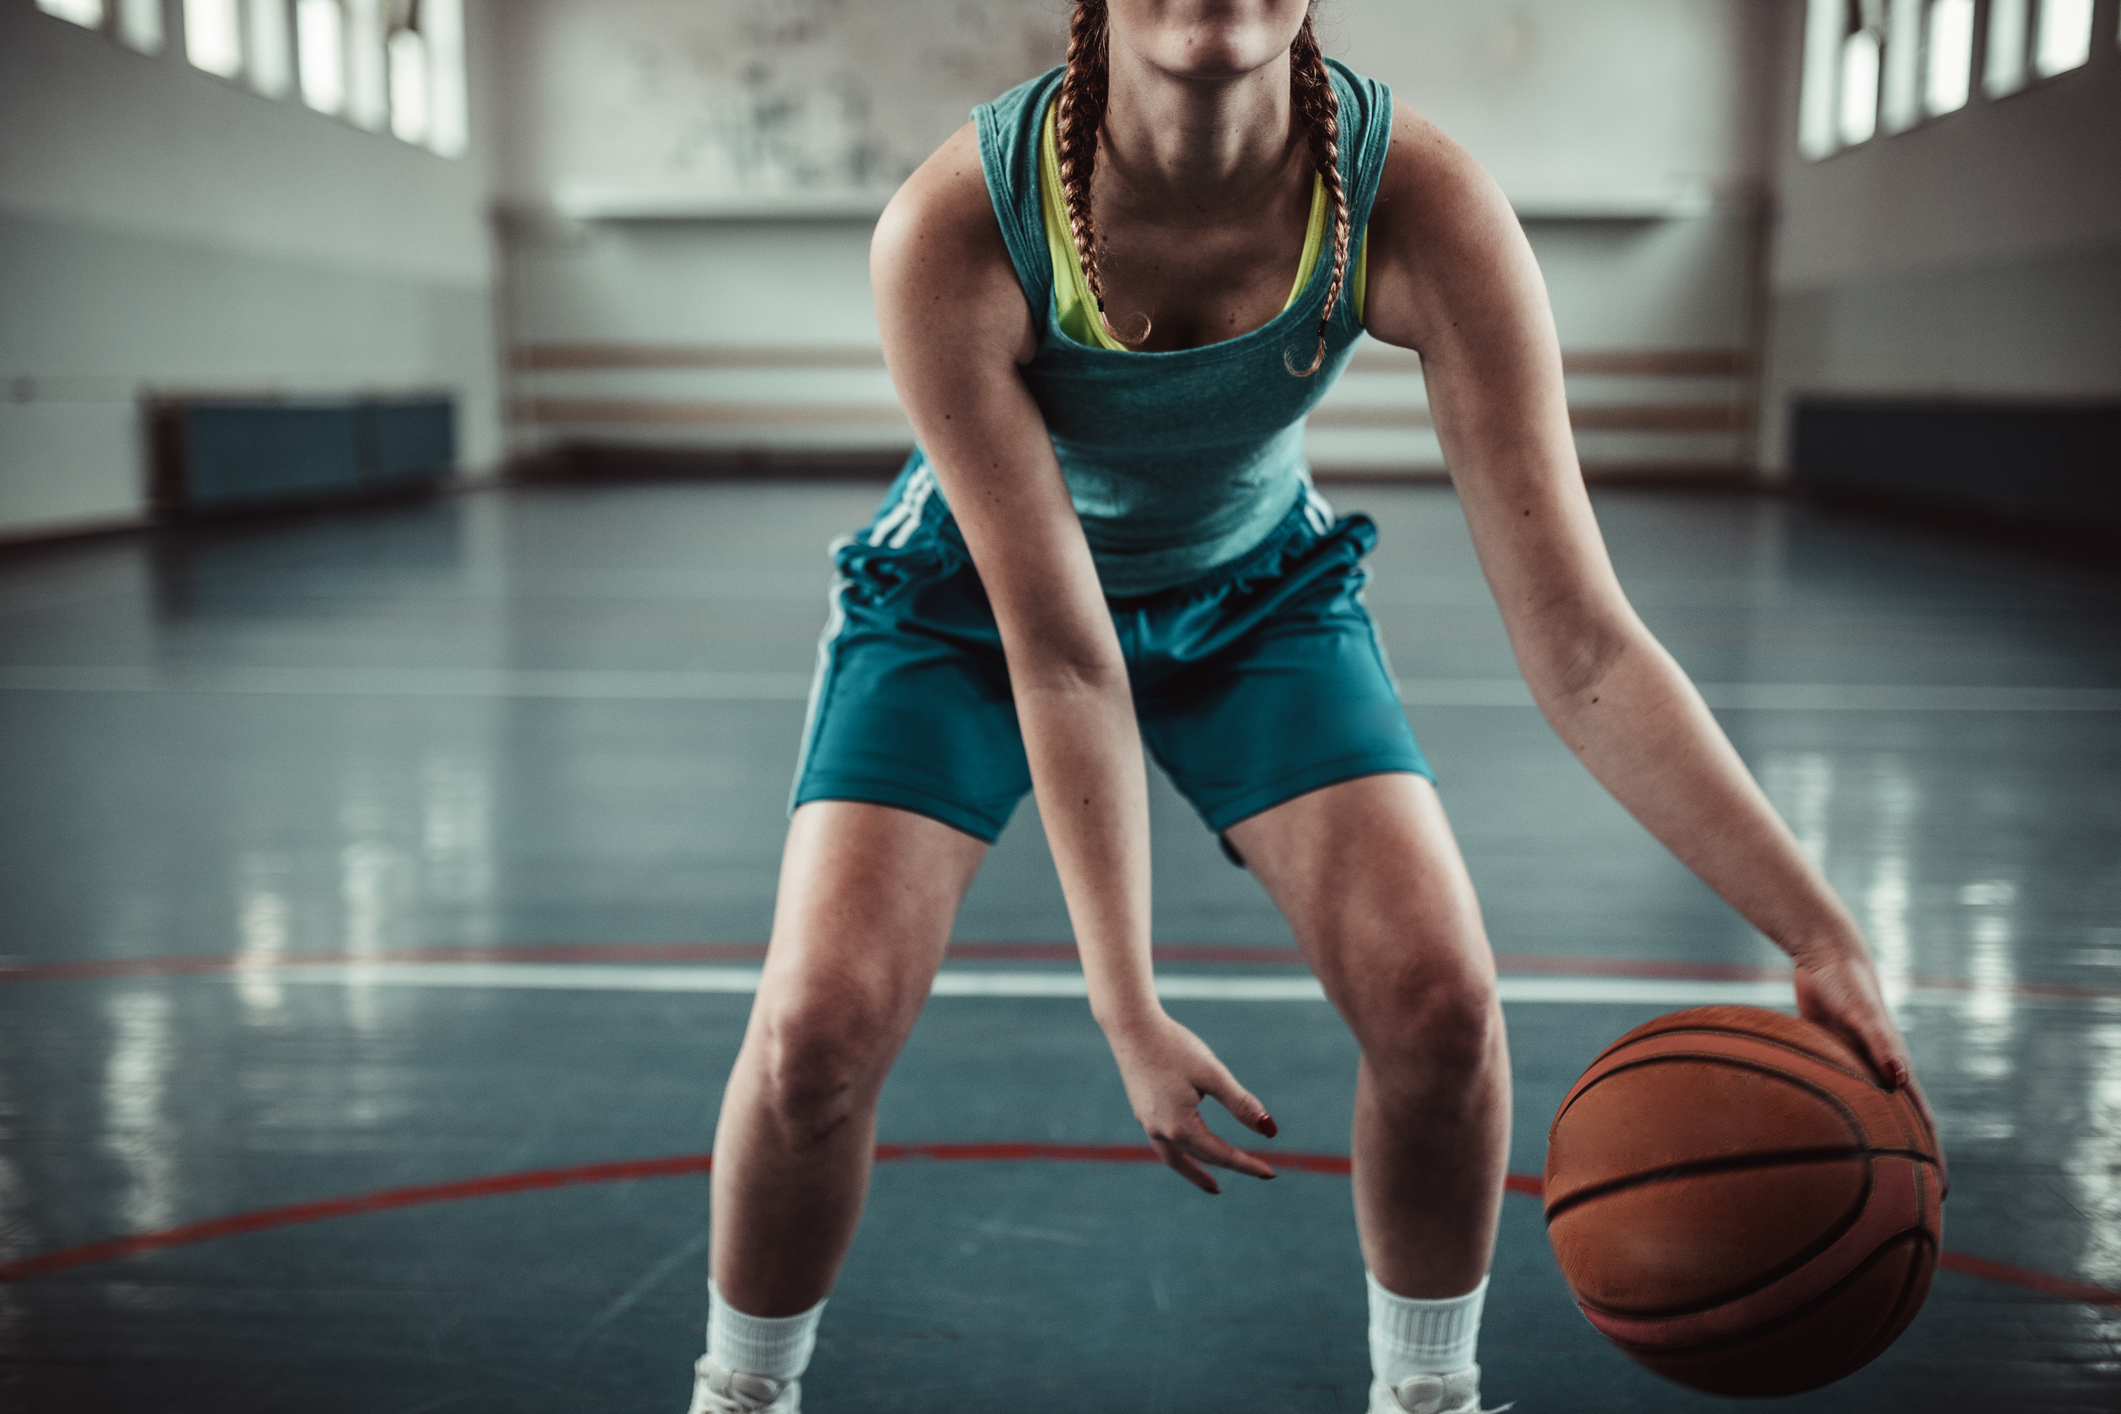 Christian School Girls’ Basketball Team Refuses To Play School With Boy On Roster. Association Bans Them From Future Tournaments.